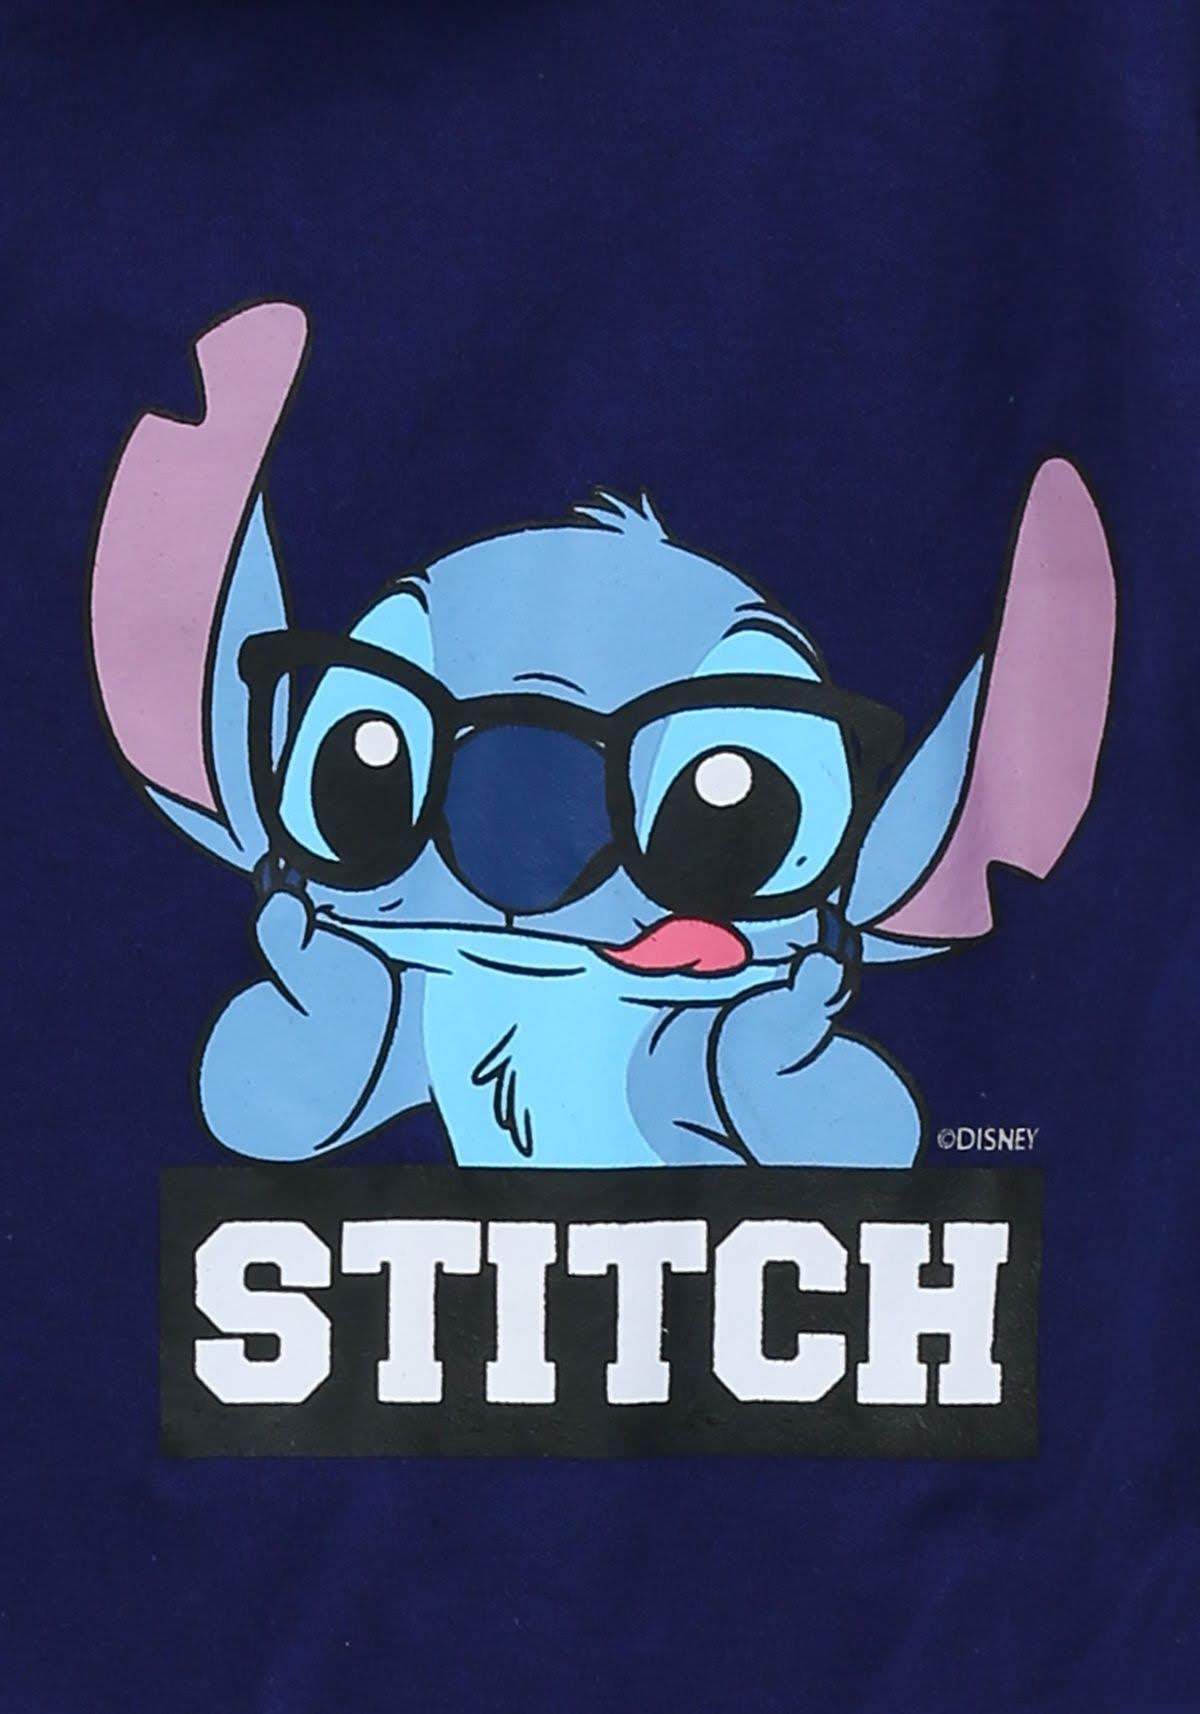 image about Disney. See more about disney, stitch